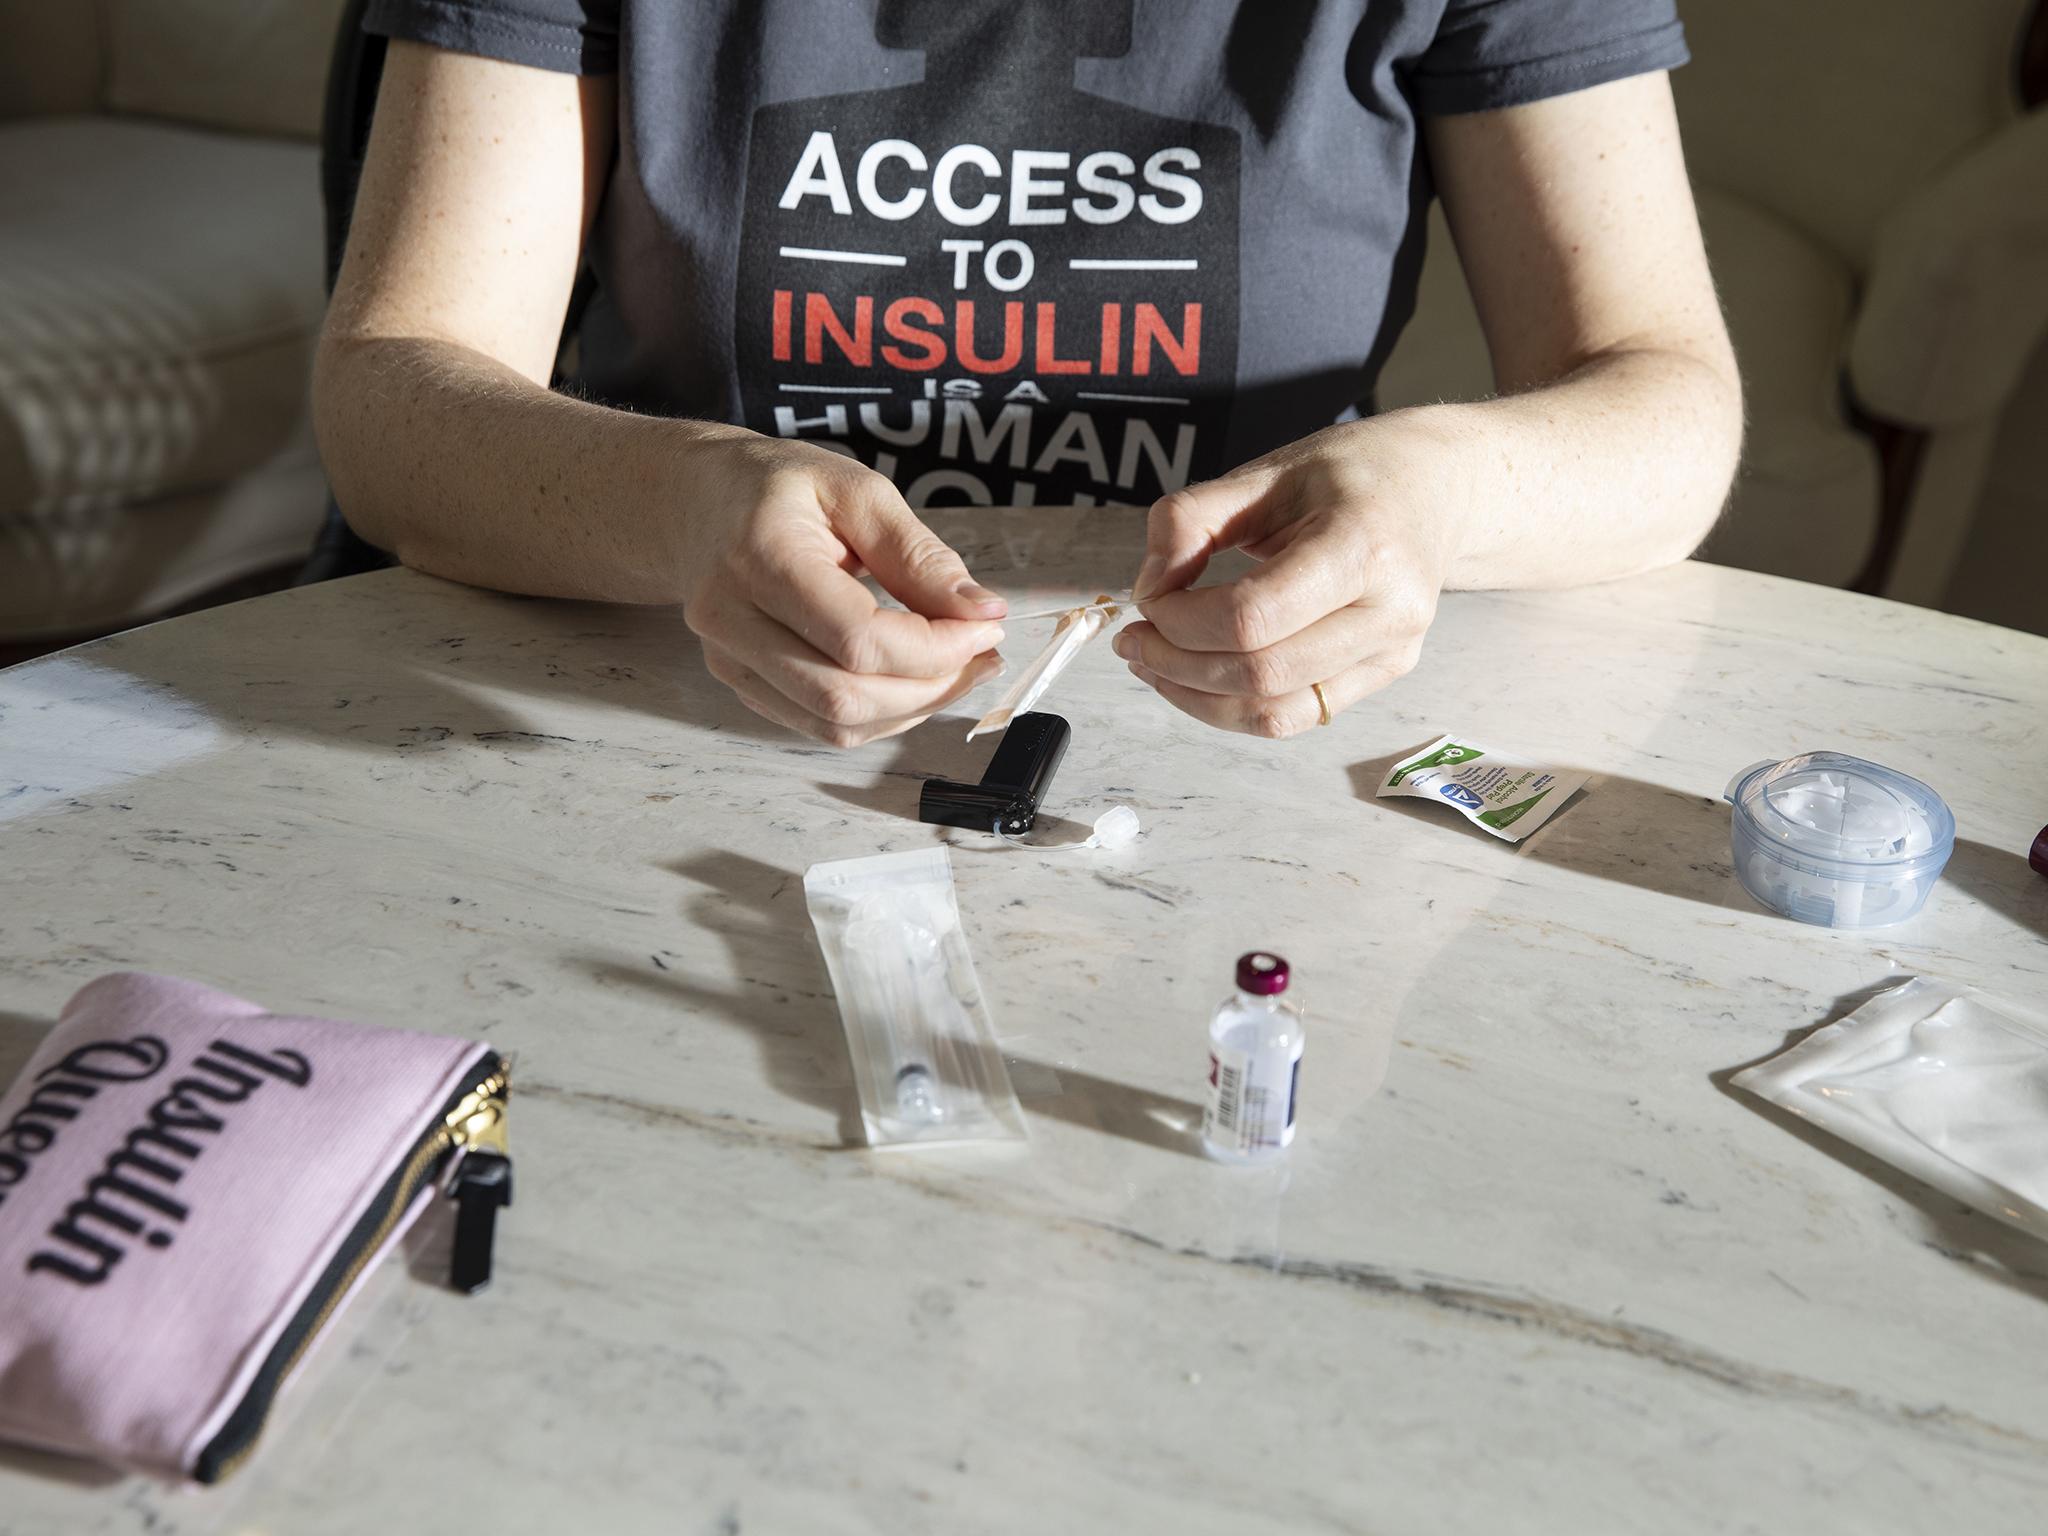 Lija Greenseid prepares to draw insulin at her Minnesota home for her daughter who has type 1 diabetes